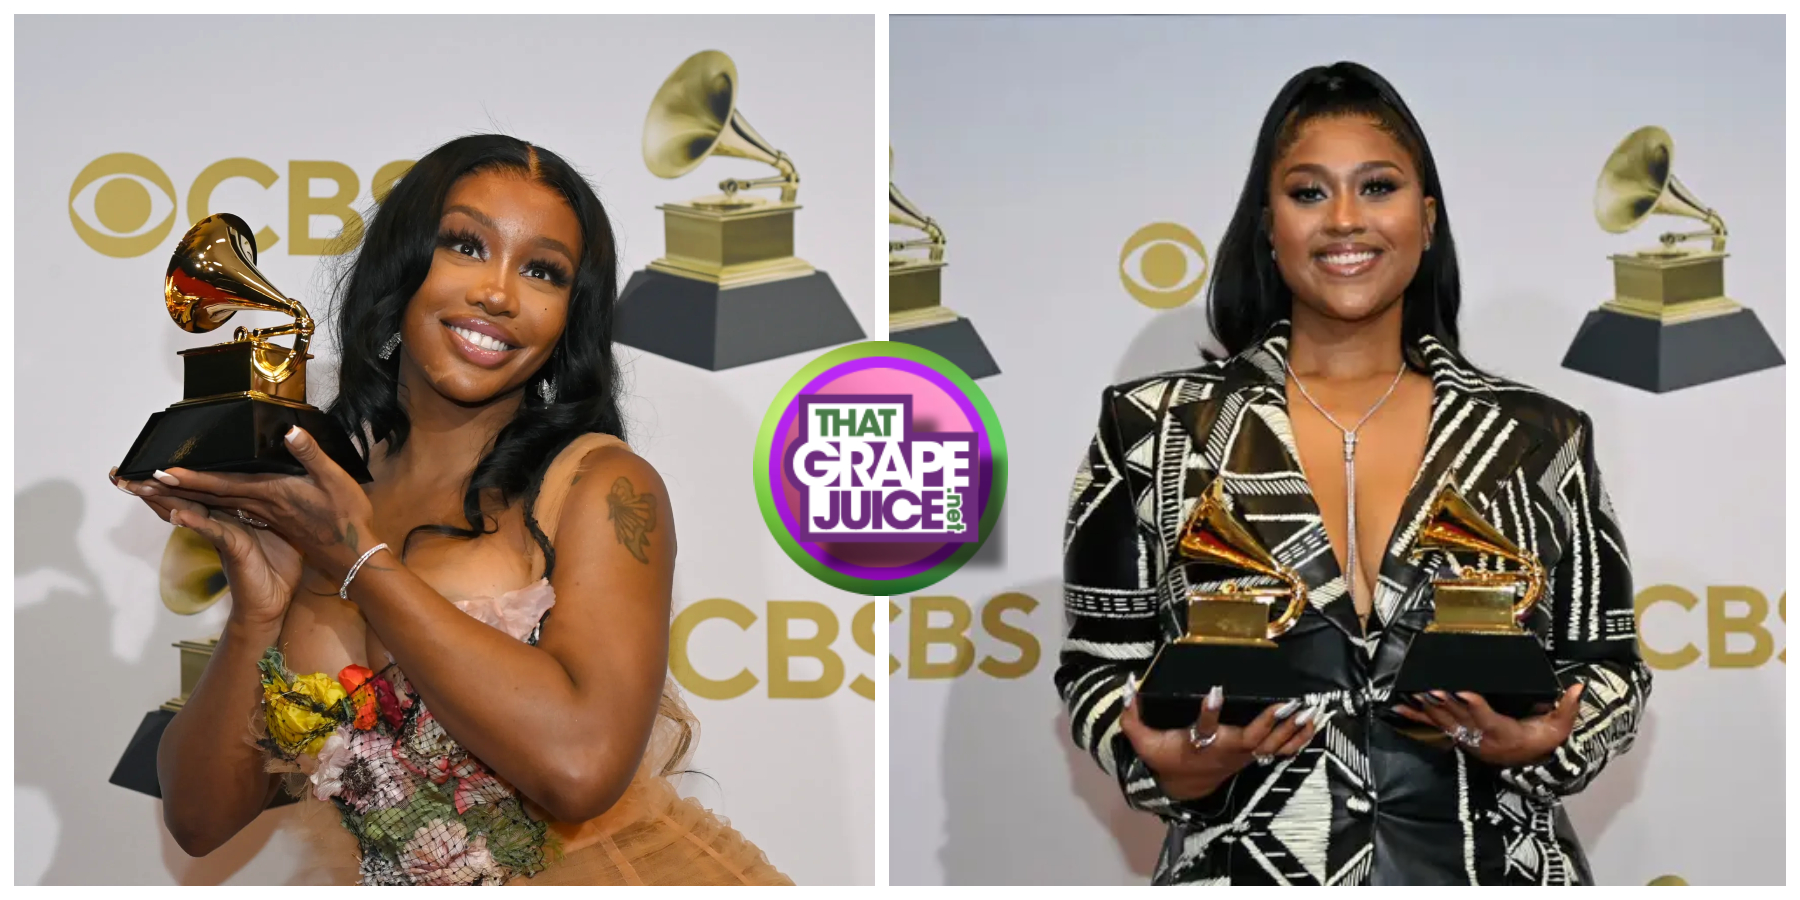 2022 Year in Review: After Years of MAJOR Snubs, SZA & Jazmine Sullivan FINALLY Won Their First GRAMMYs